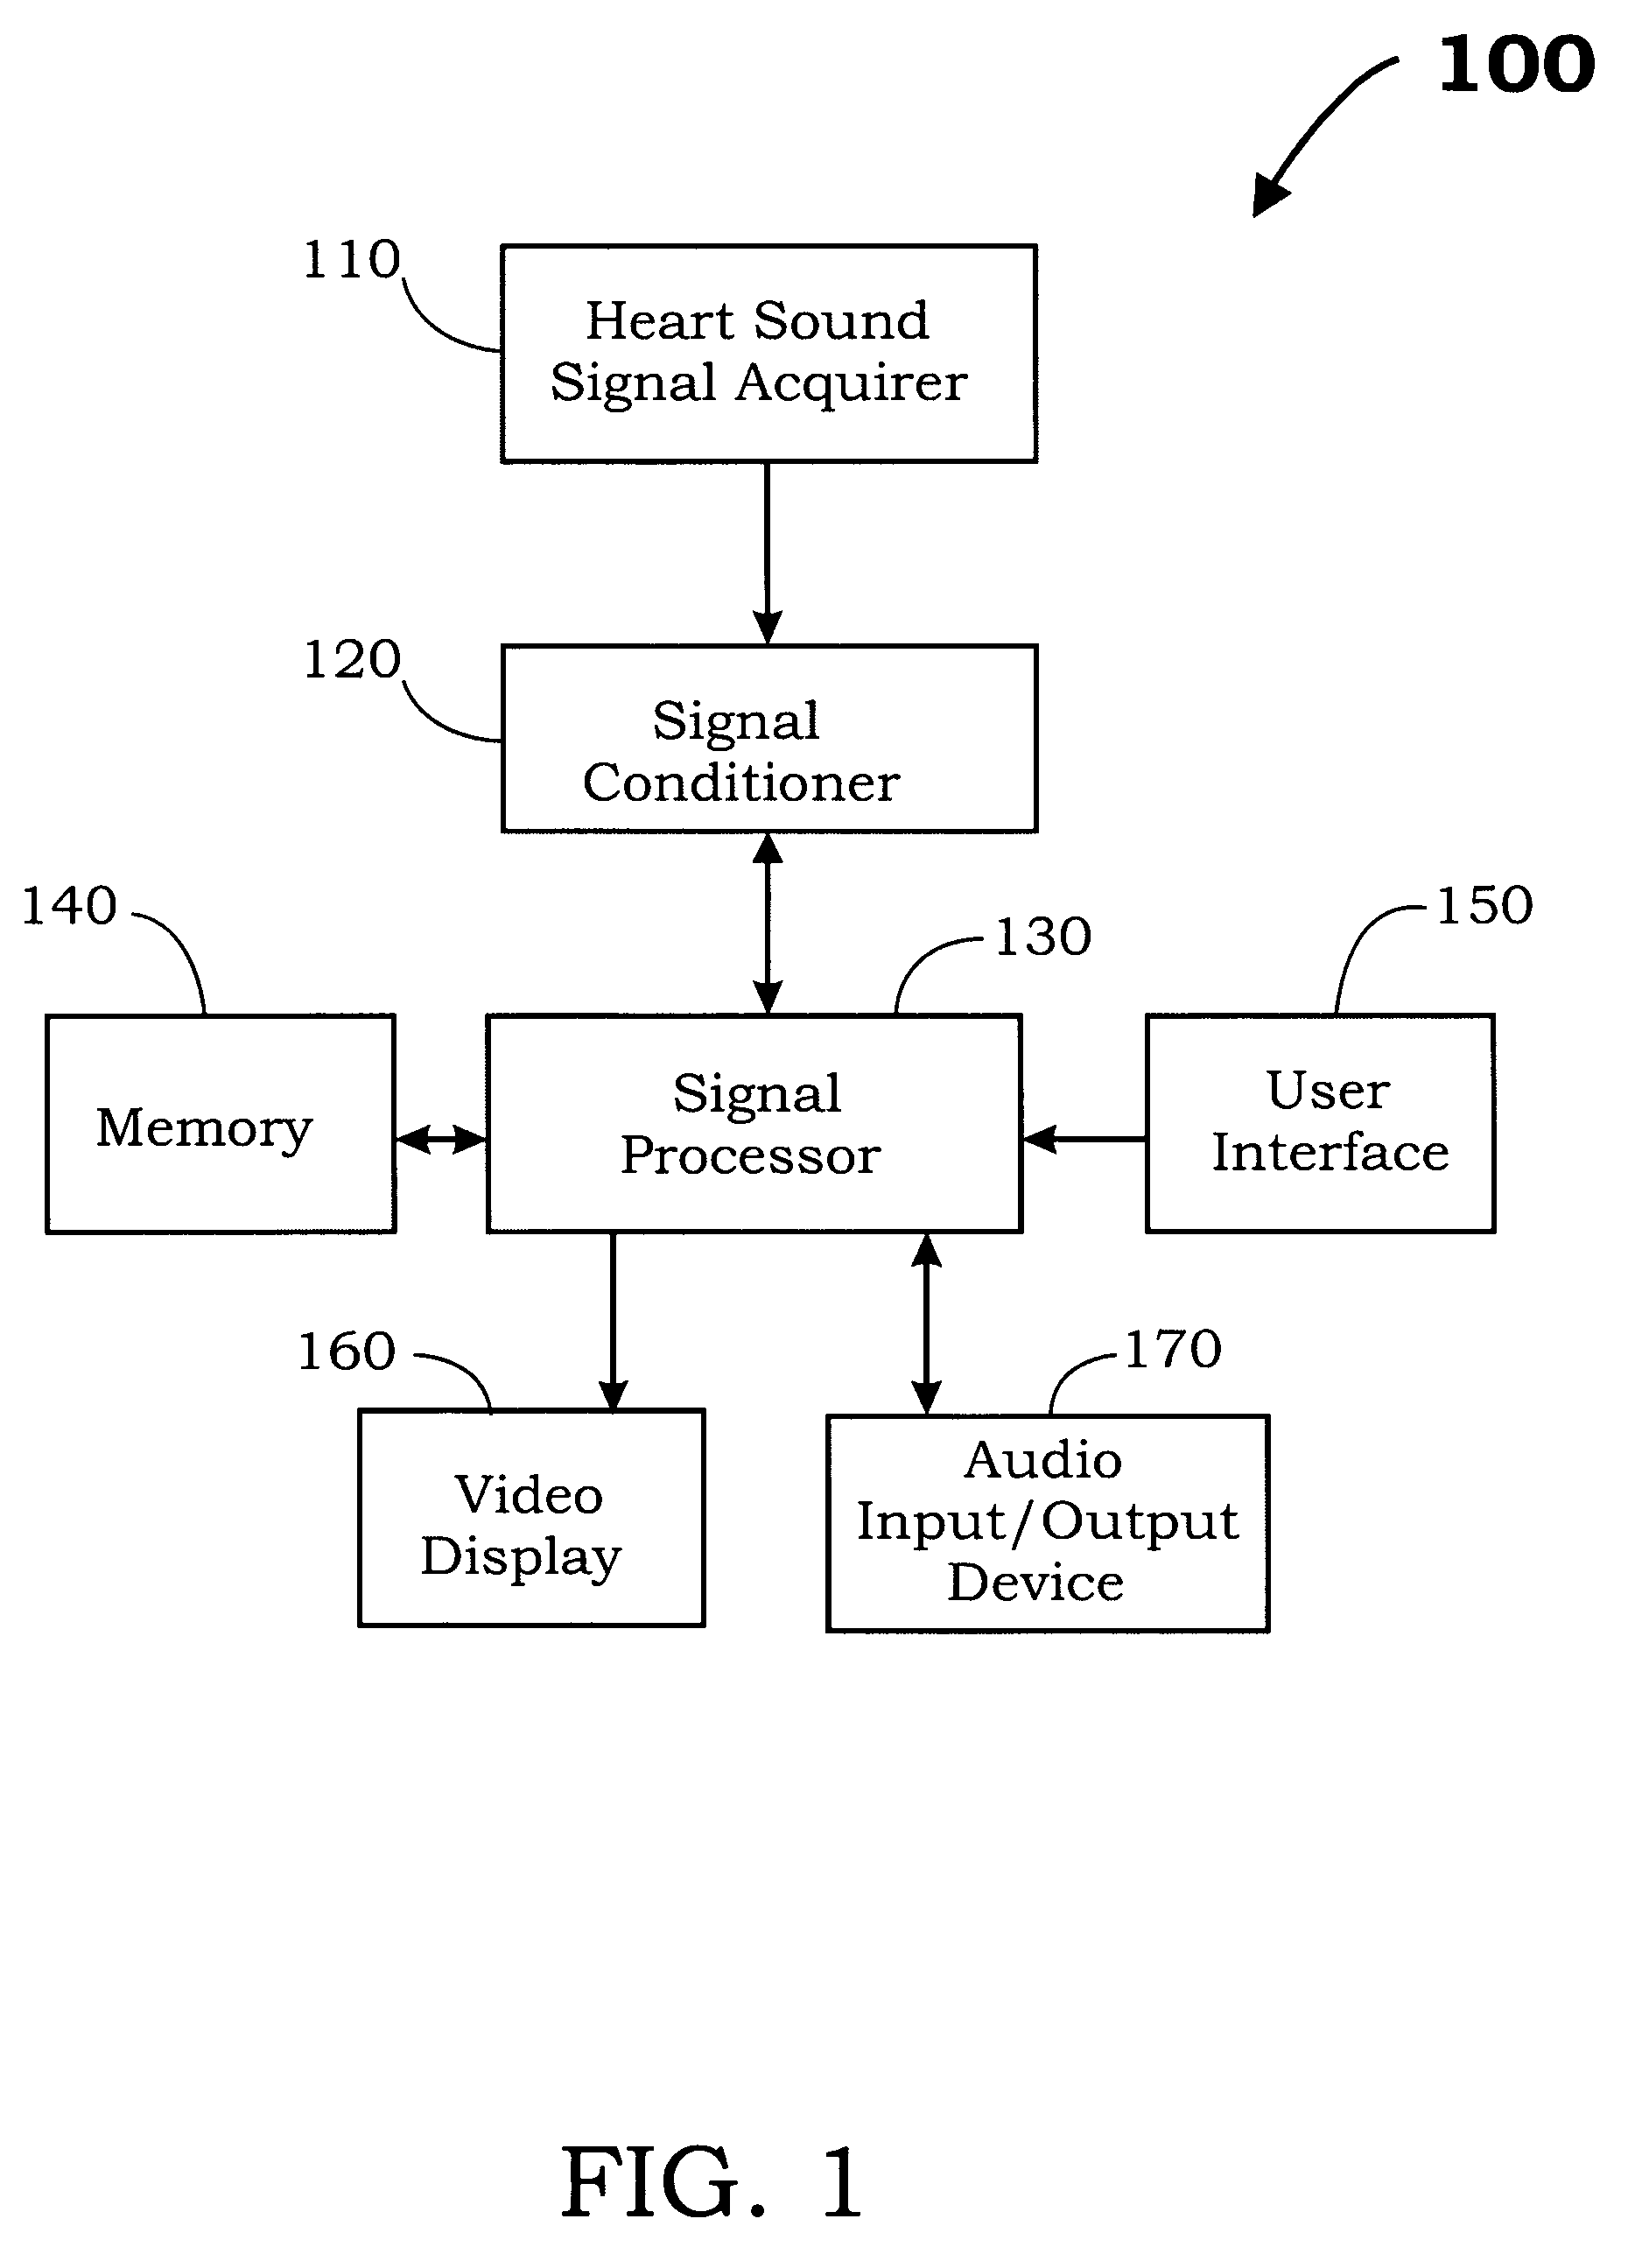 Systems and methods for tuning, analysis and display of heart sounds